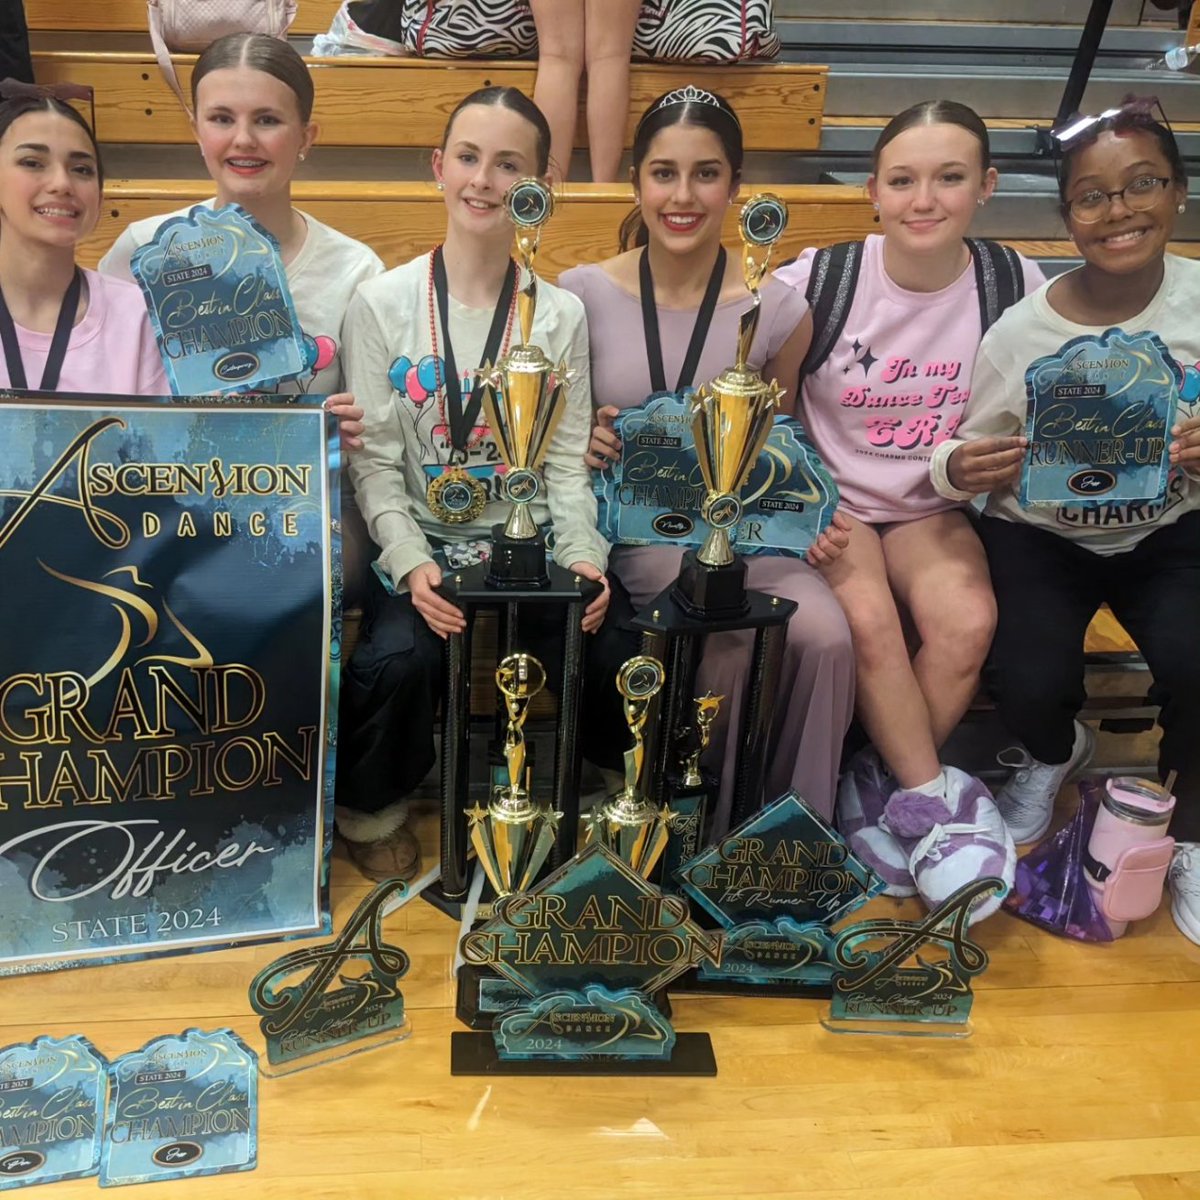 That's a wrap on contest season 2024! I am so proud of how hard this team has worked all season long! Their dances improved at each contest and they finished state as 3rd place overall team and 2nd place overall officers against some really tough competition! #kmscougaepride